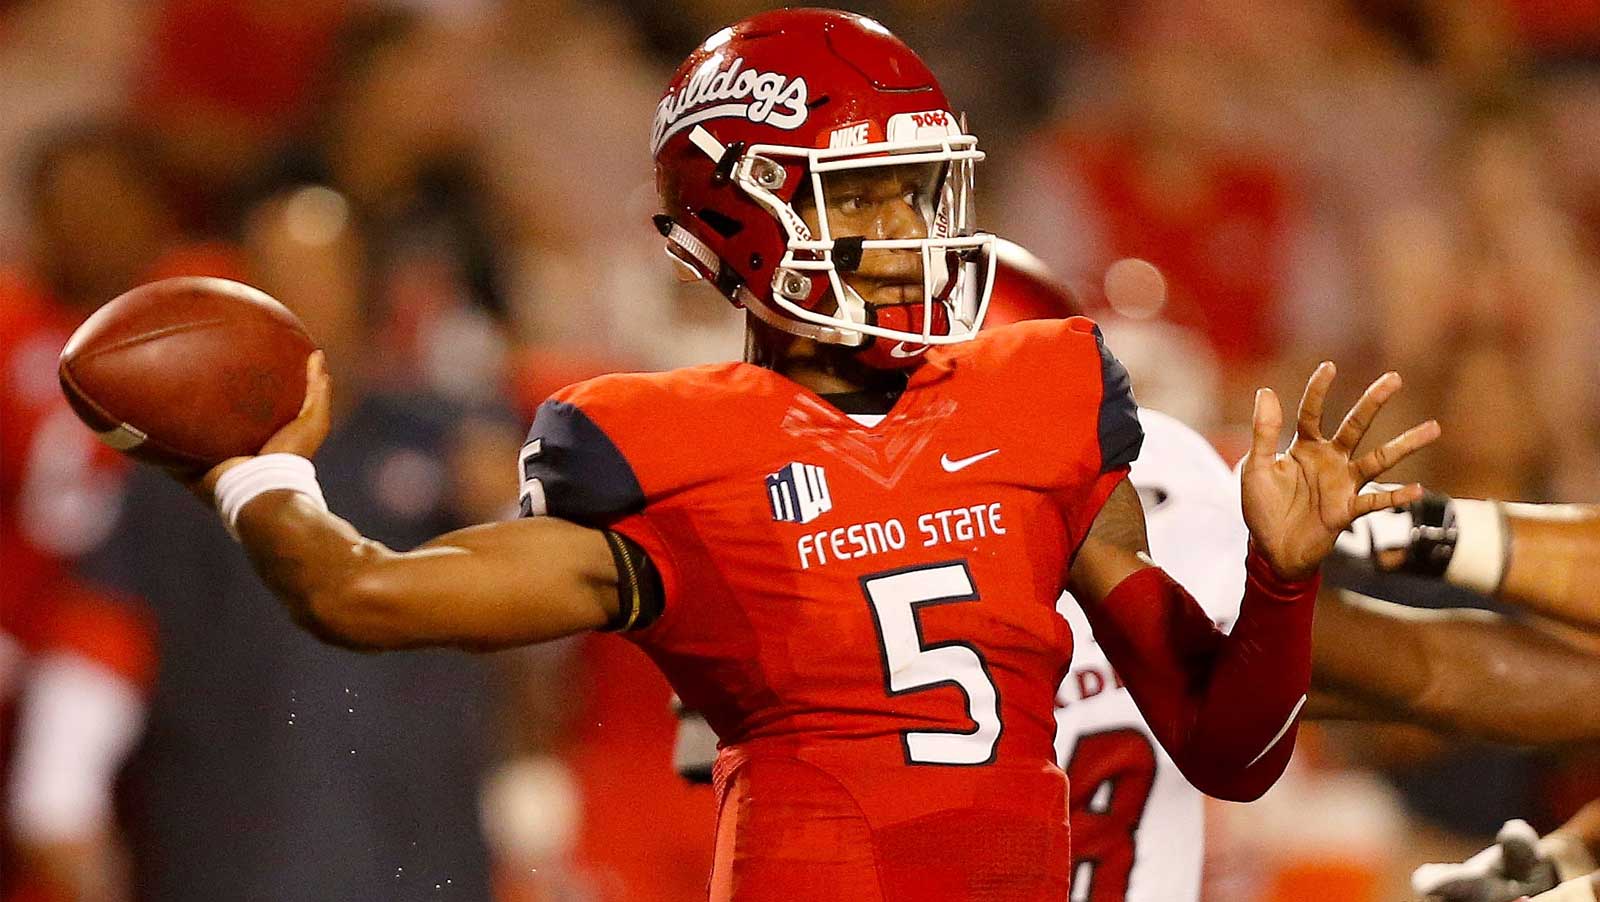 Second Week of Bowls Includes Fresno State as Underdogs in Hawaii